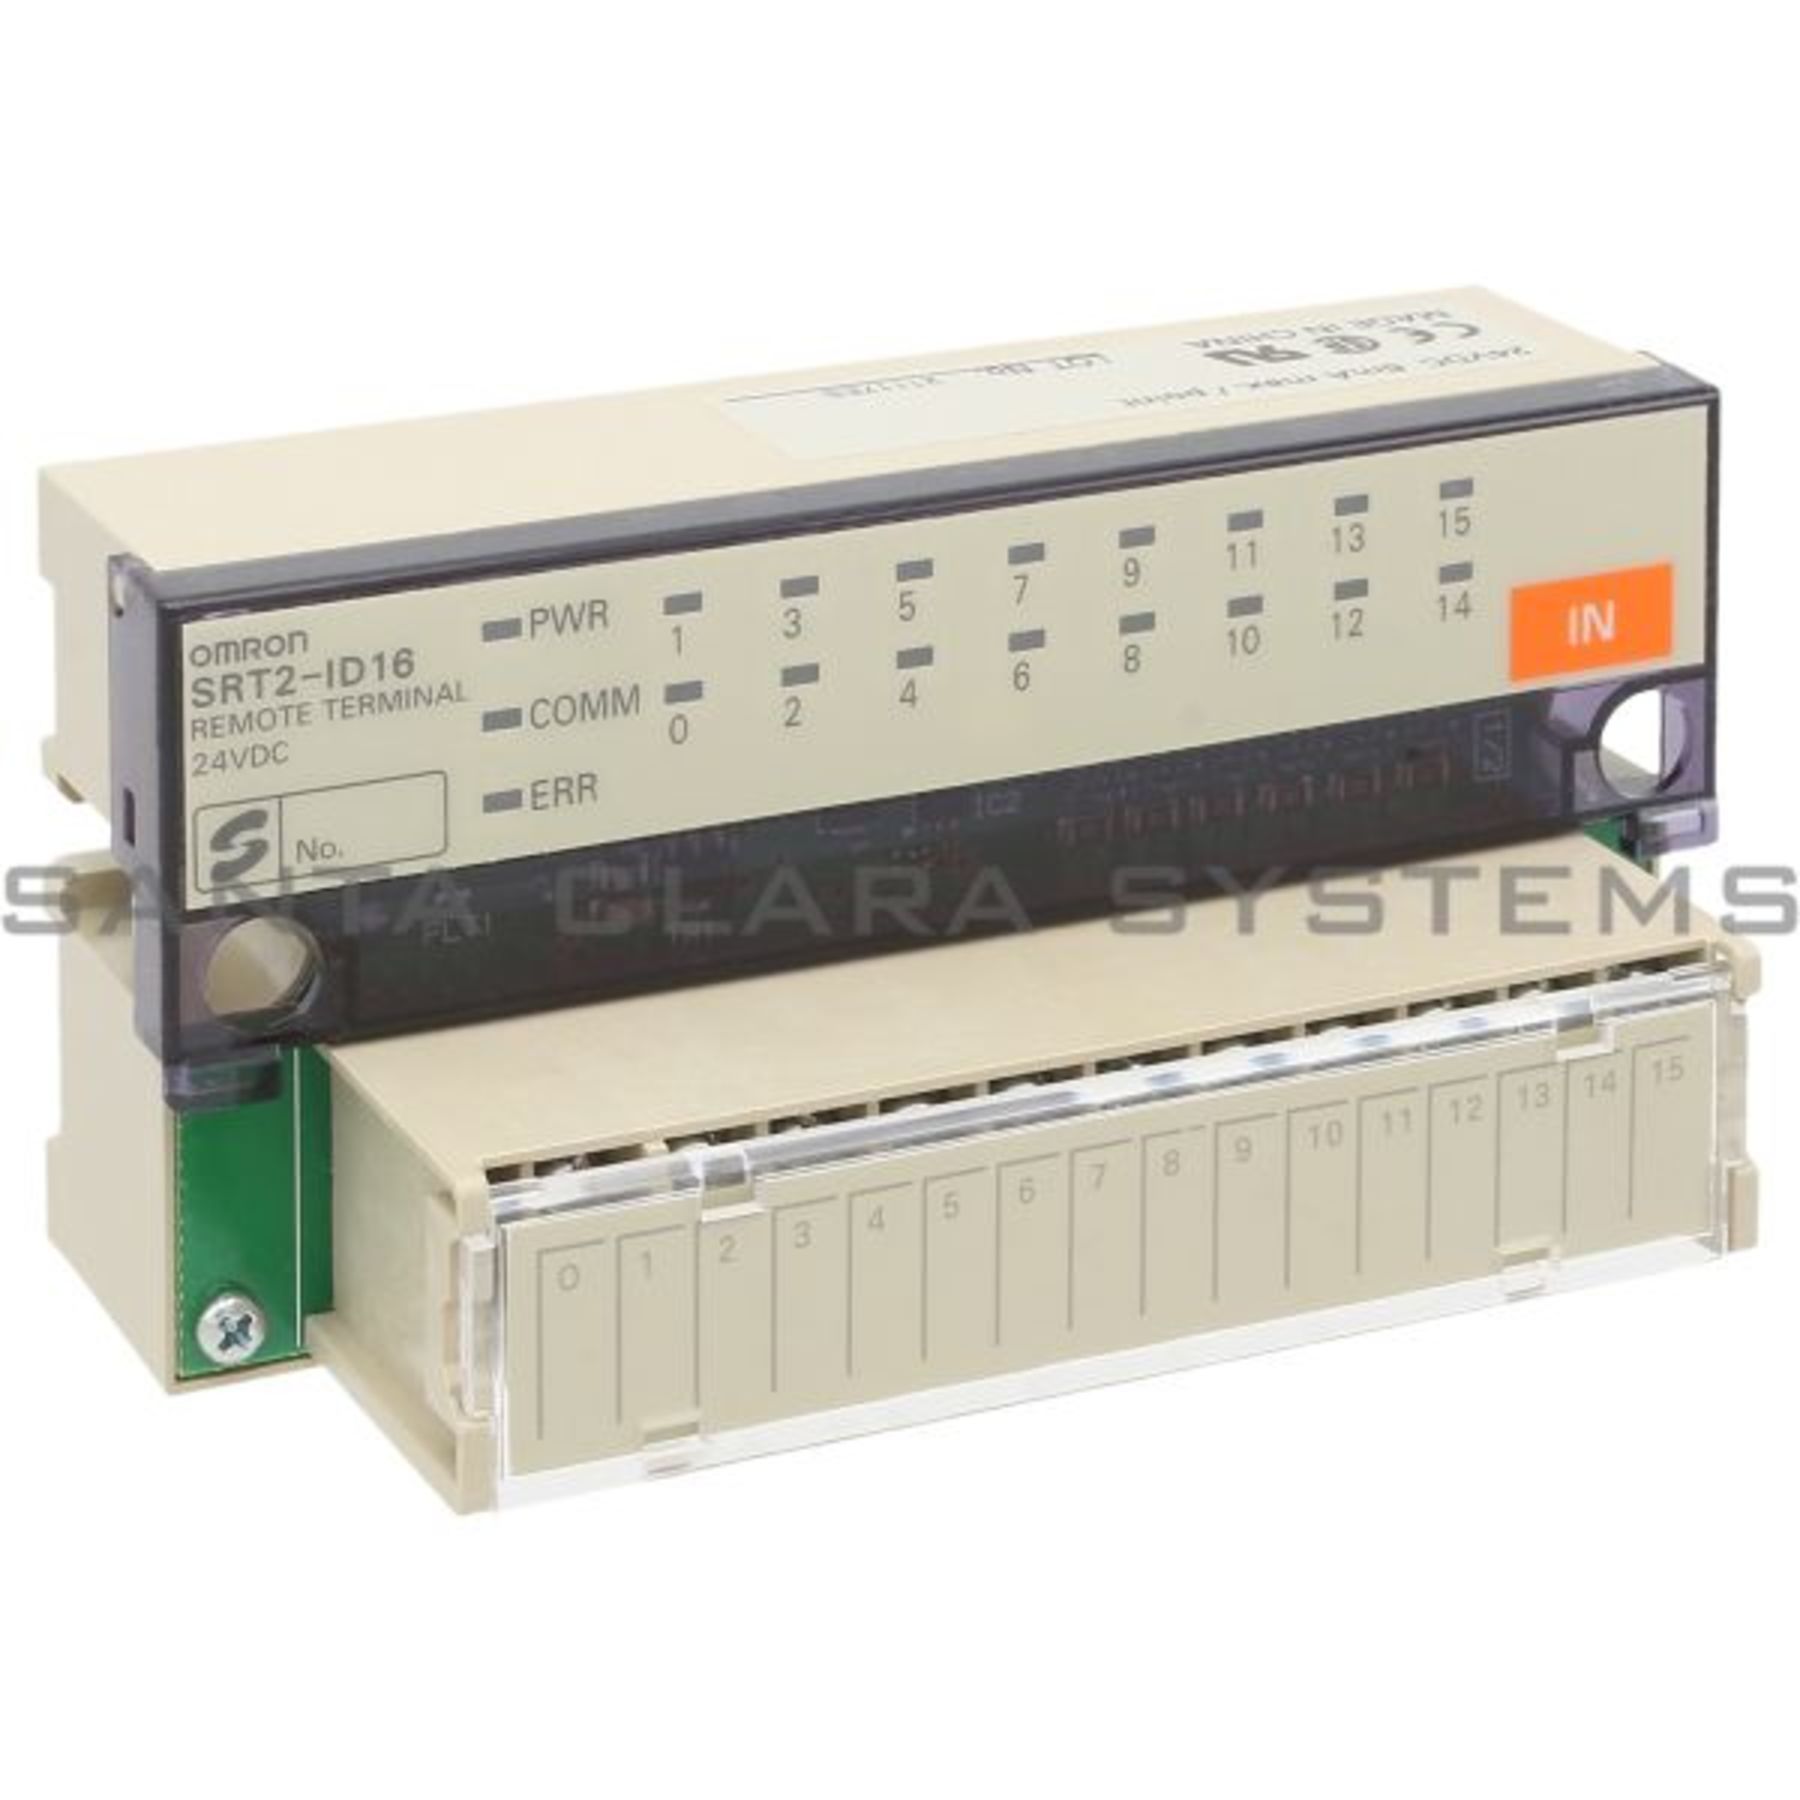 Omron SRT2ROC16 Industrial Control System for sale online 